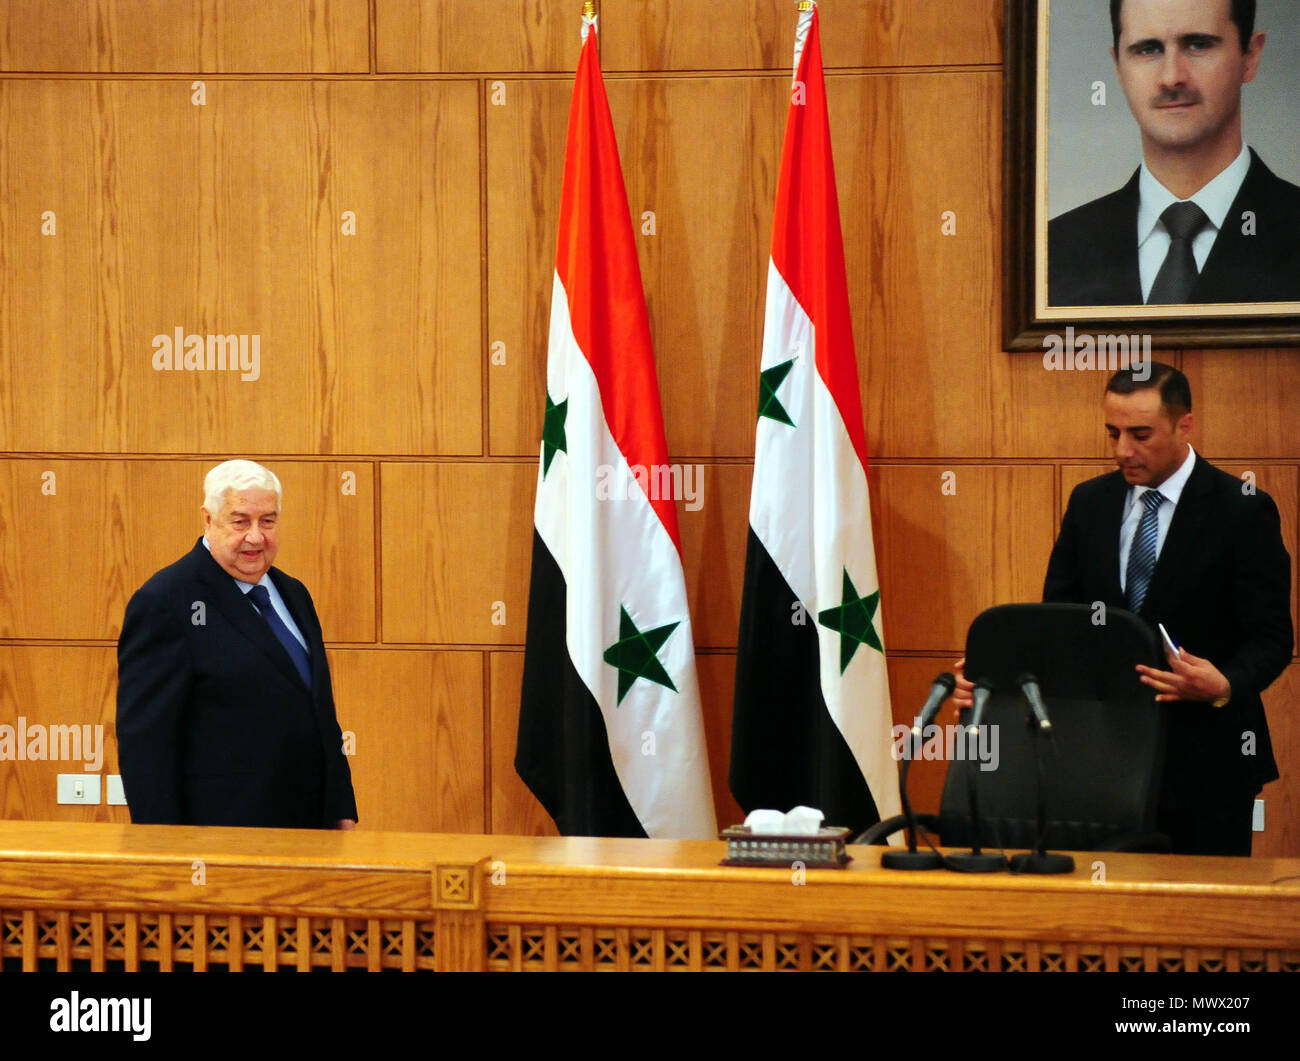 Damascus, Syria. 2nd June, 2018. Syria's Foreign Minister Walid al-Moallem (L) arrives to address a press conference in Damascus, Syria, on June 2, 2018. Walid al-Moallem said on Saturday that the U.S. should withdraw from the al-Tanf base in southeastern Syria ahead of any agreement reached in the south of the country. Credit: Ammar Safarjalani/Xinhua/Alamy Live News Stock Photo